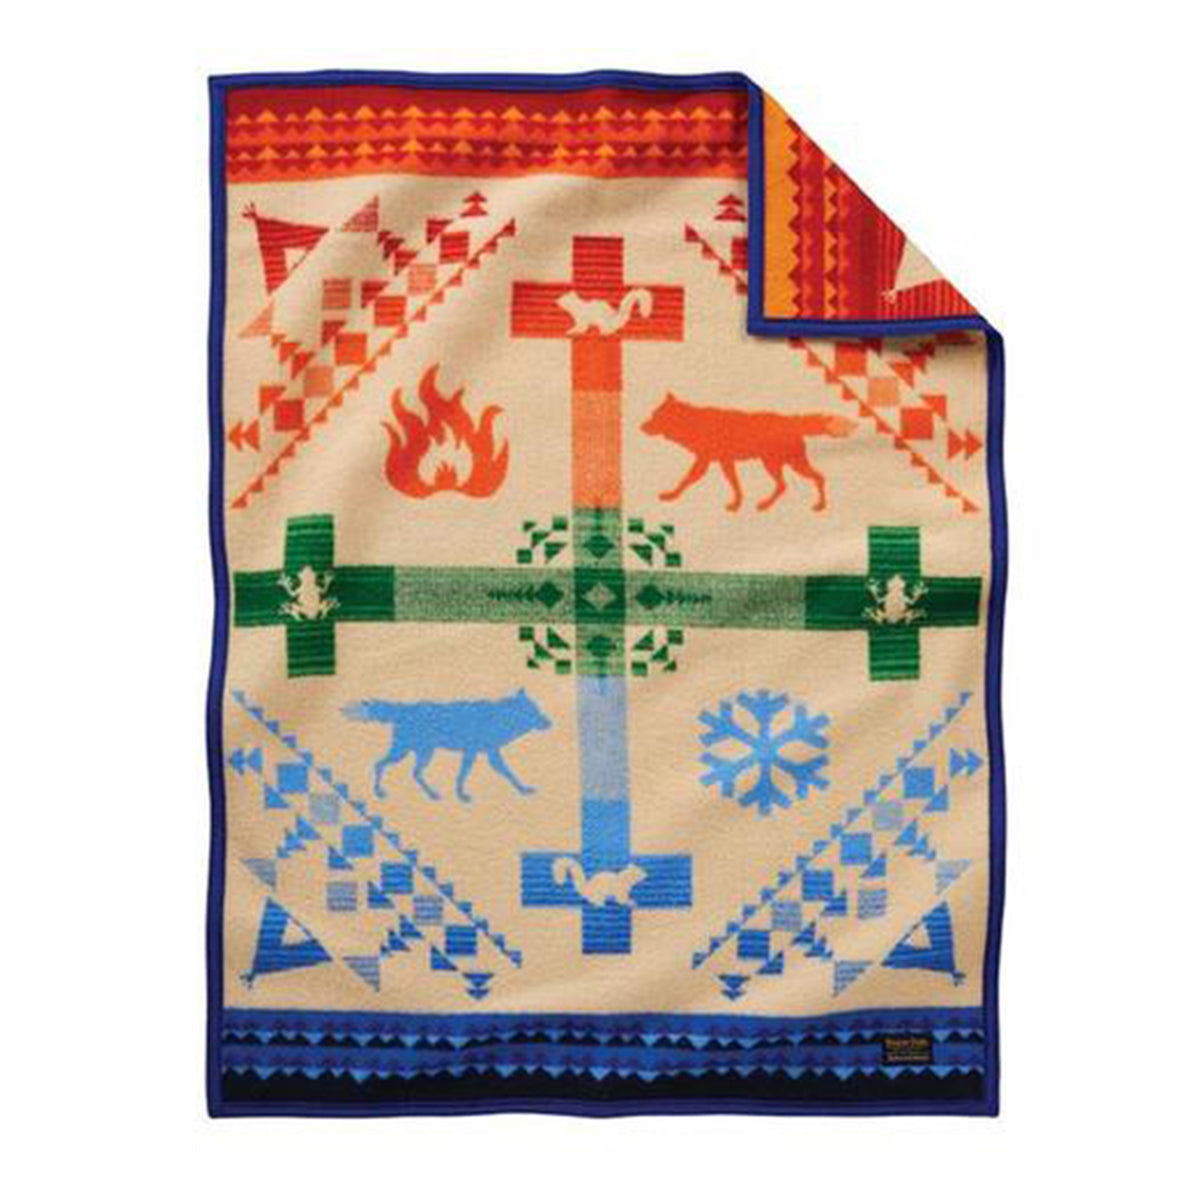 Pendleton blankets are heirloom-quality wool blankets made in the USA using wool that sourced from ranches around the country. This blanket tells the story of how the trickster coyote stole Fire  from the tall mountain and gave it to the People. 